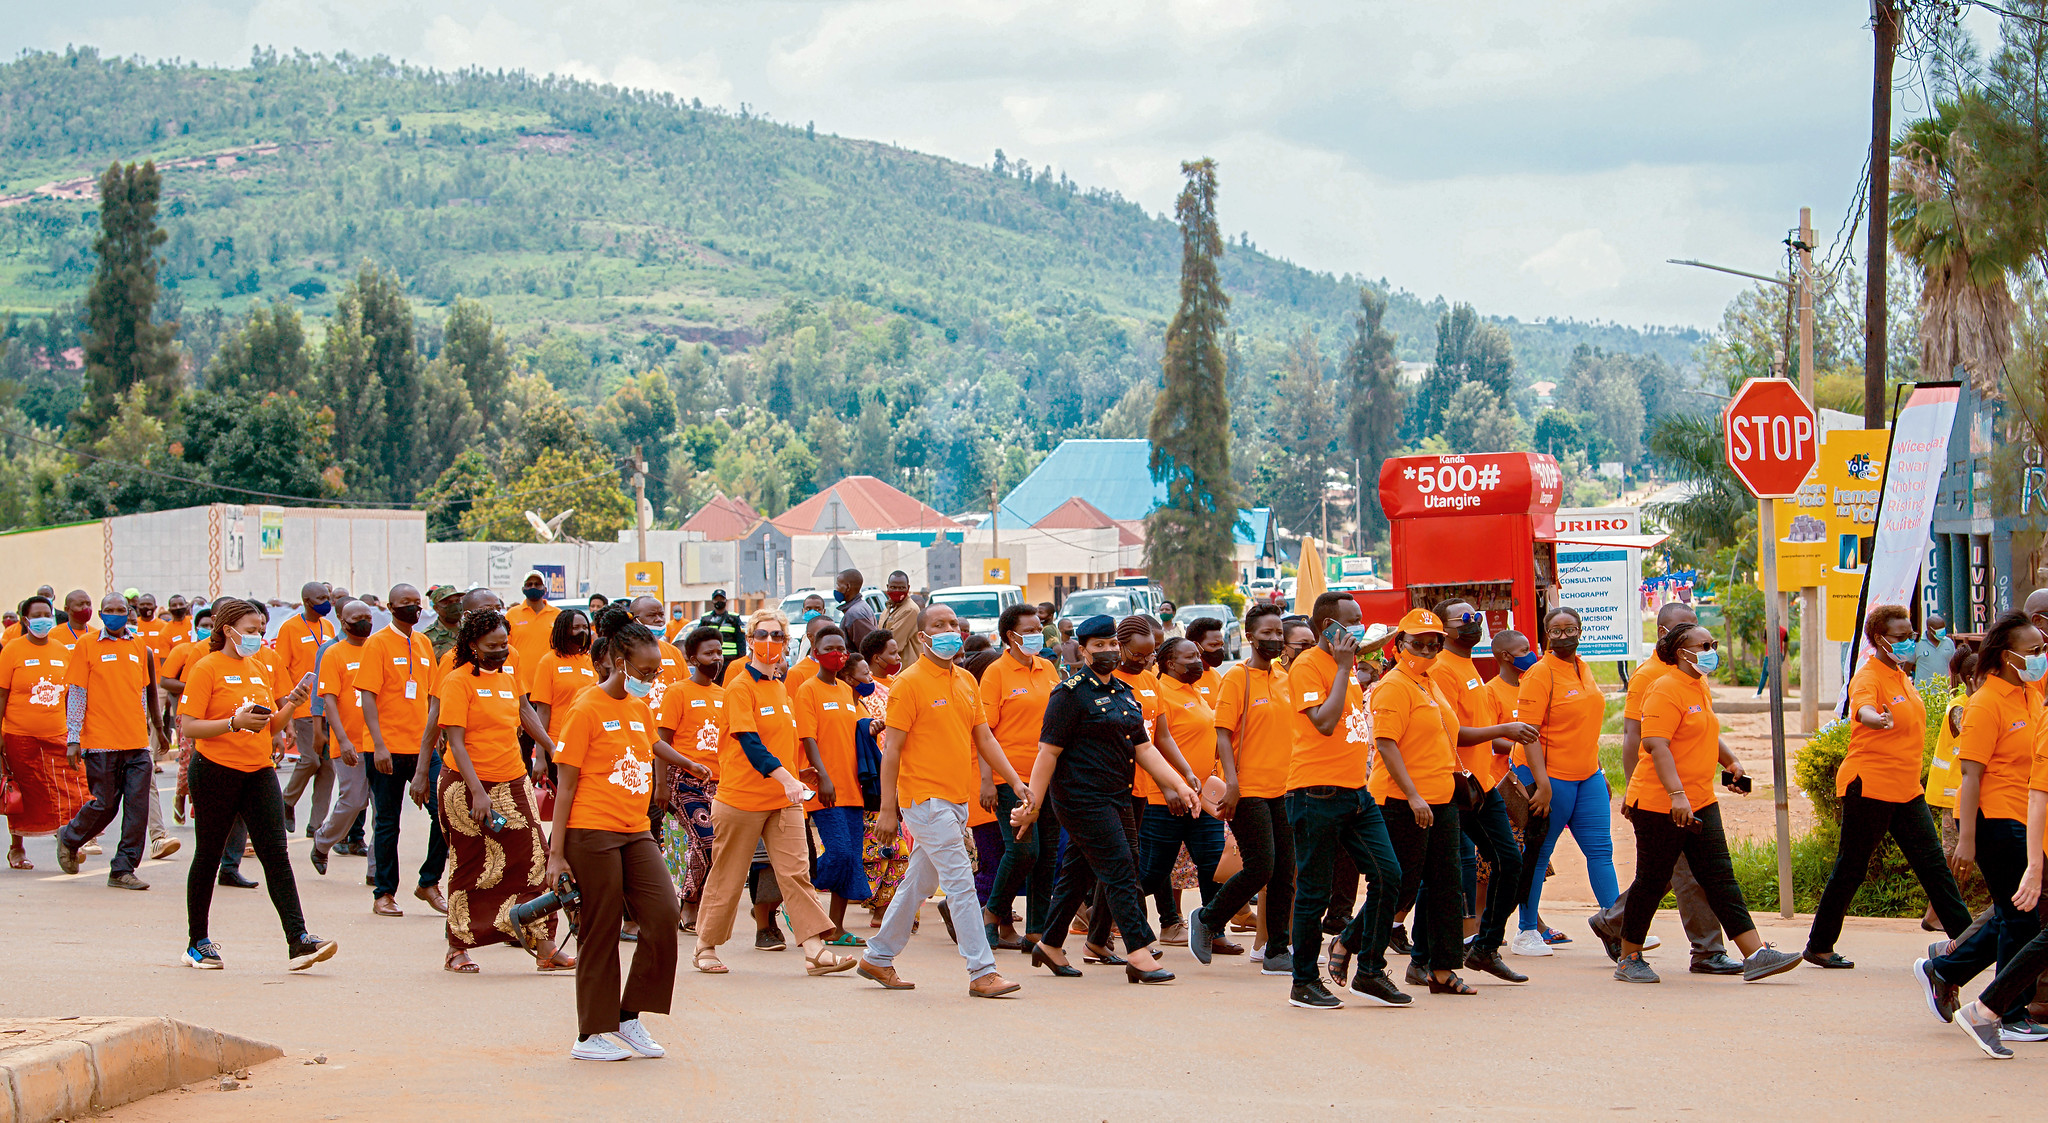 First Lady of Rwanda joins UN Women Rwanda, CSOs, and residents for the launch of 16 Days of Activism Against Gender-Based Violence campaign in a solidarity walk.